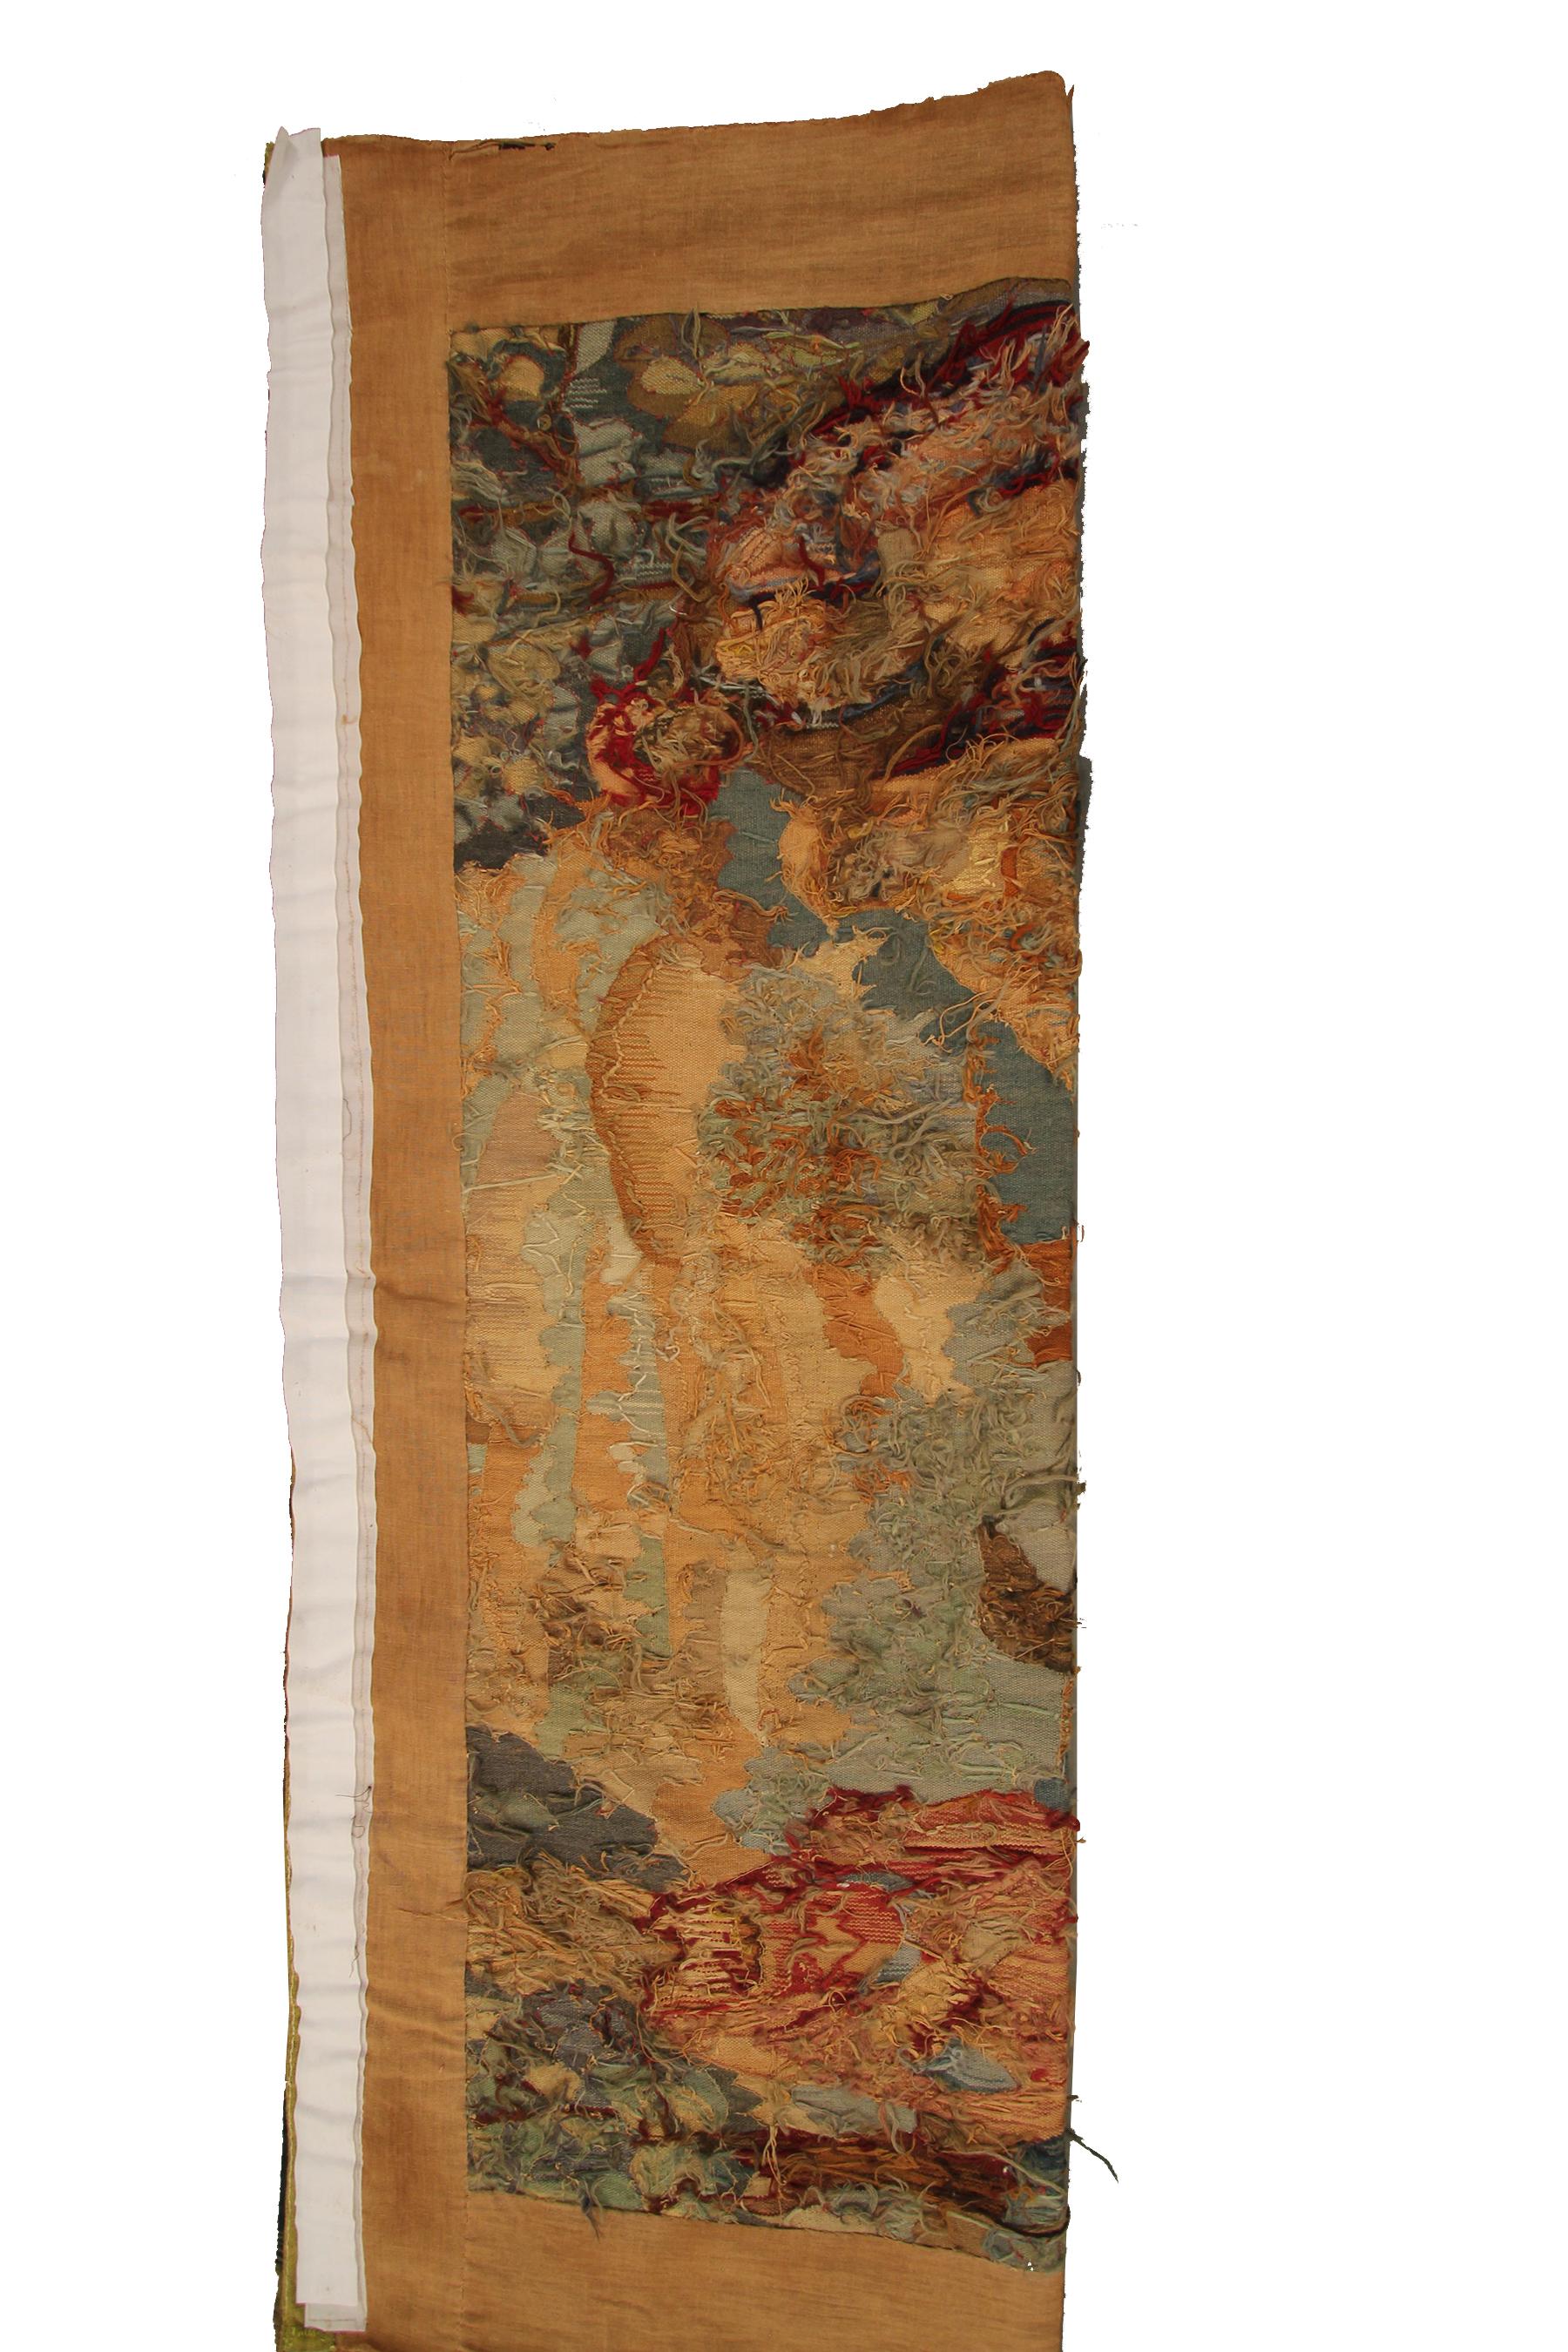 Wool Antique French Tapestry Handmade Tapestry Beige Large Tapestry Medieval, 1920